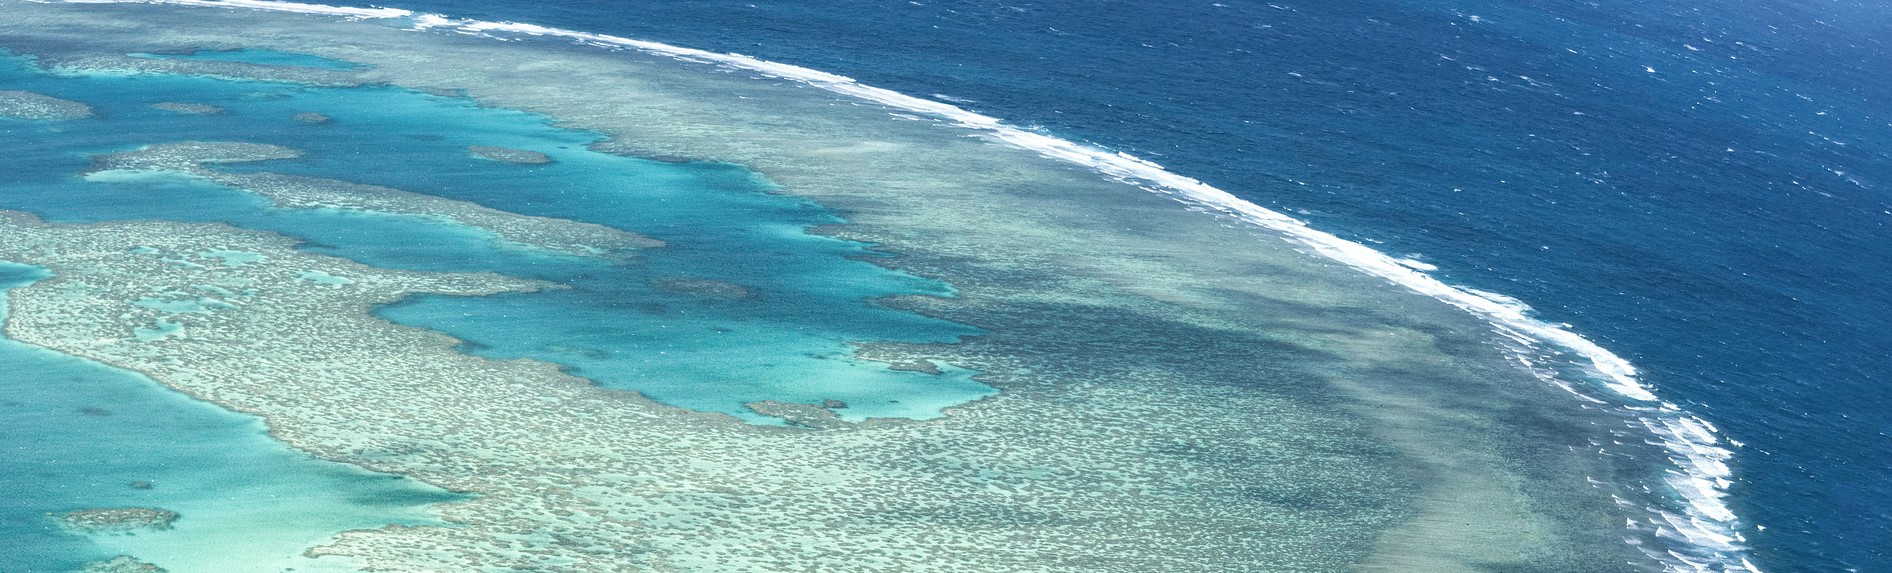 Where should I stay to see the Great Barrier Reef?